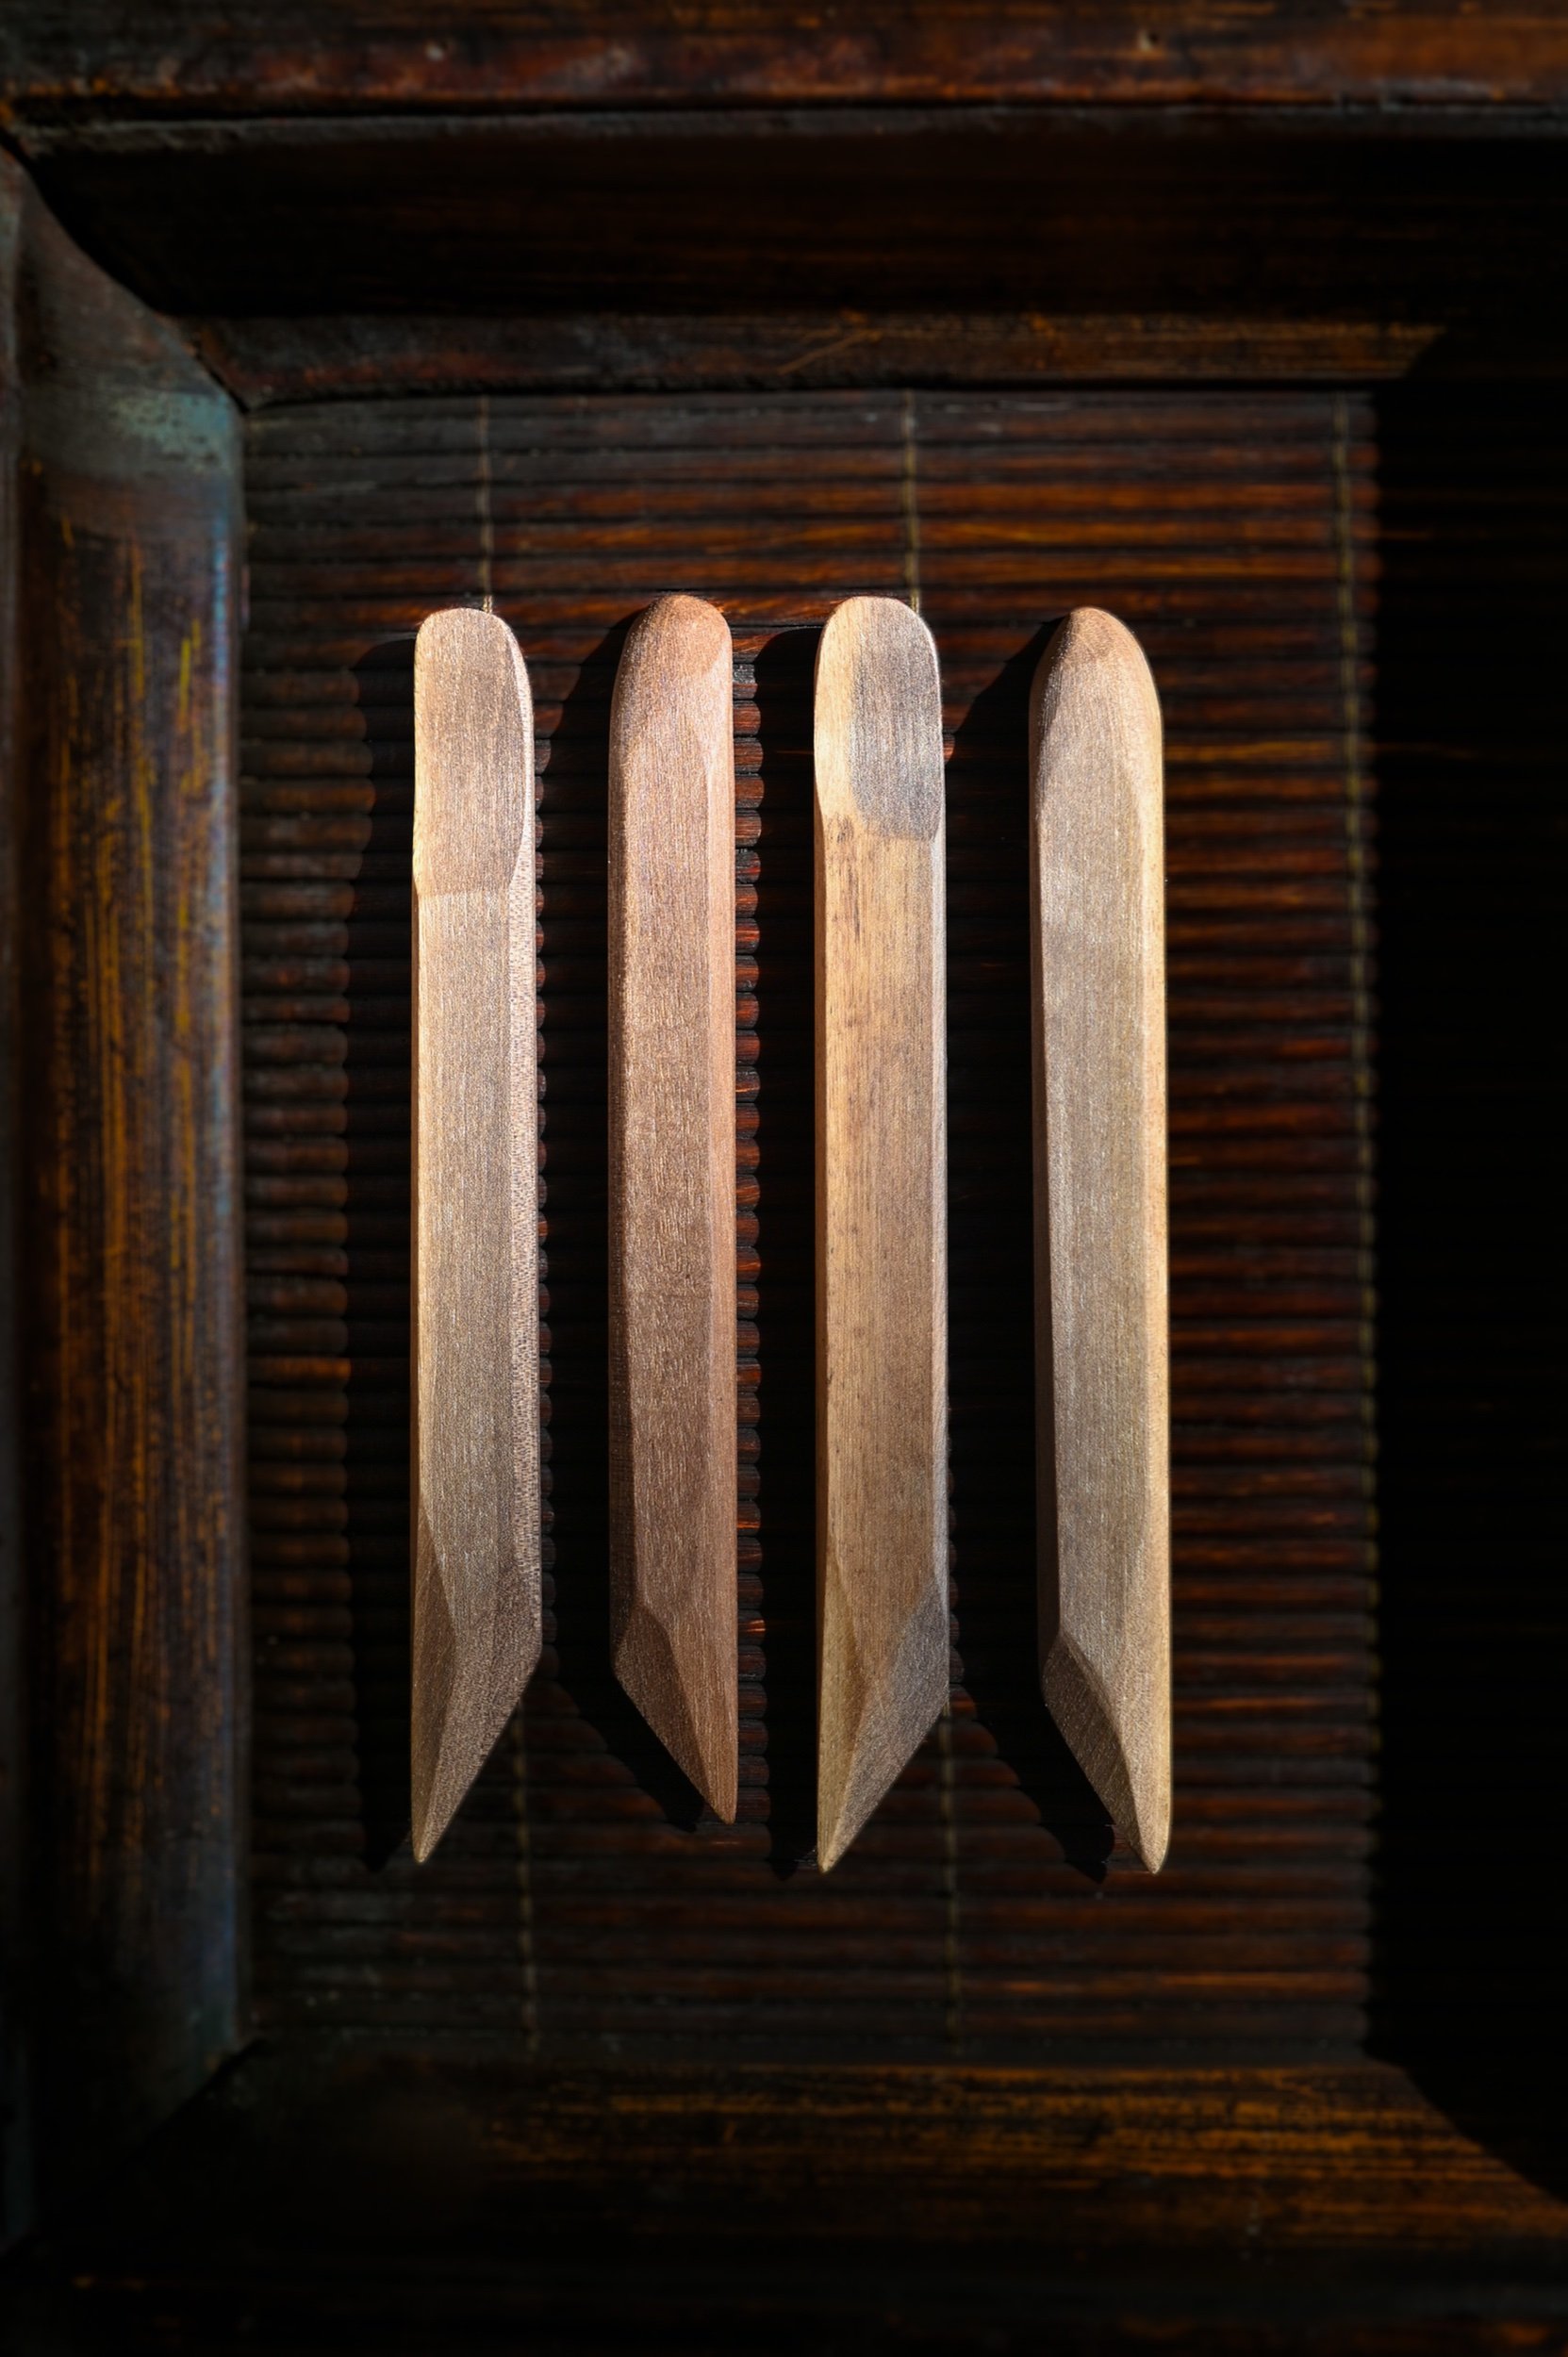  Raw Black Walnut potter’s knives, showing variations in color + grain. 